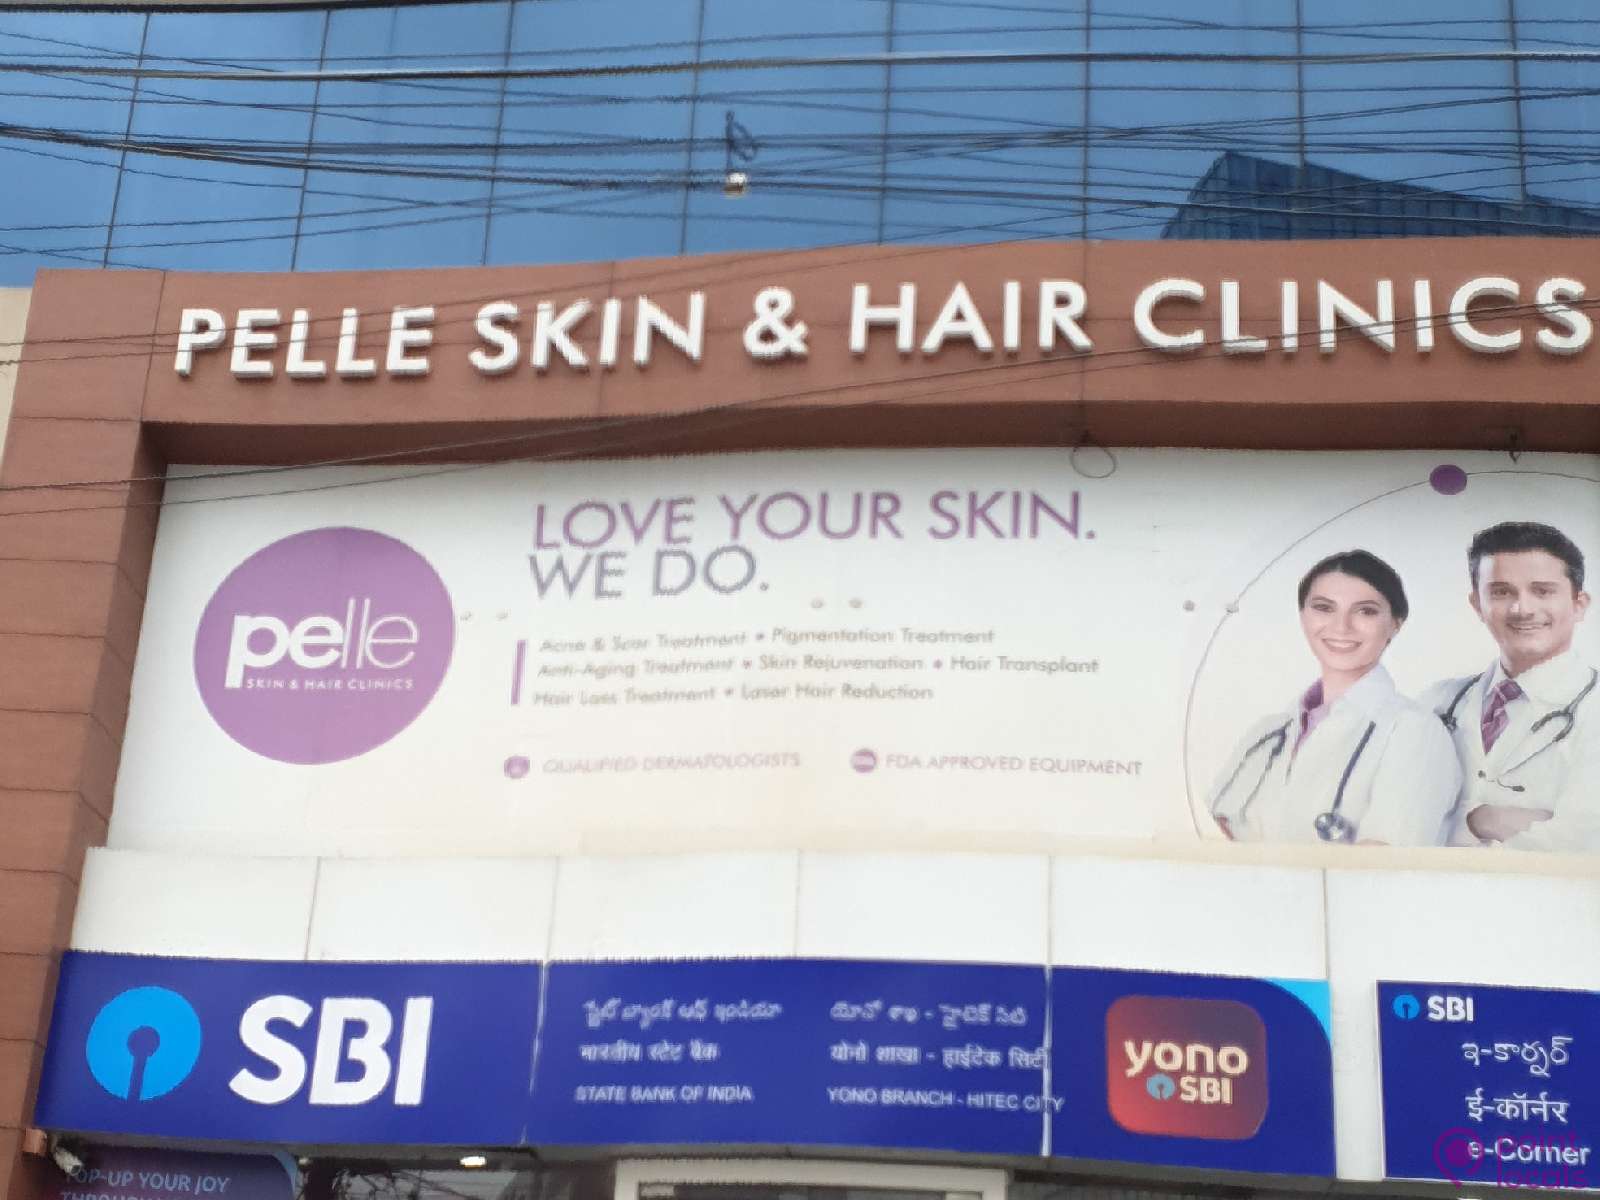 Pelle Skin and Hair Clinics - Skin Care Clinic in Hyderabad,Telangana |  Pointlocals